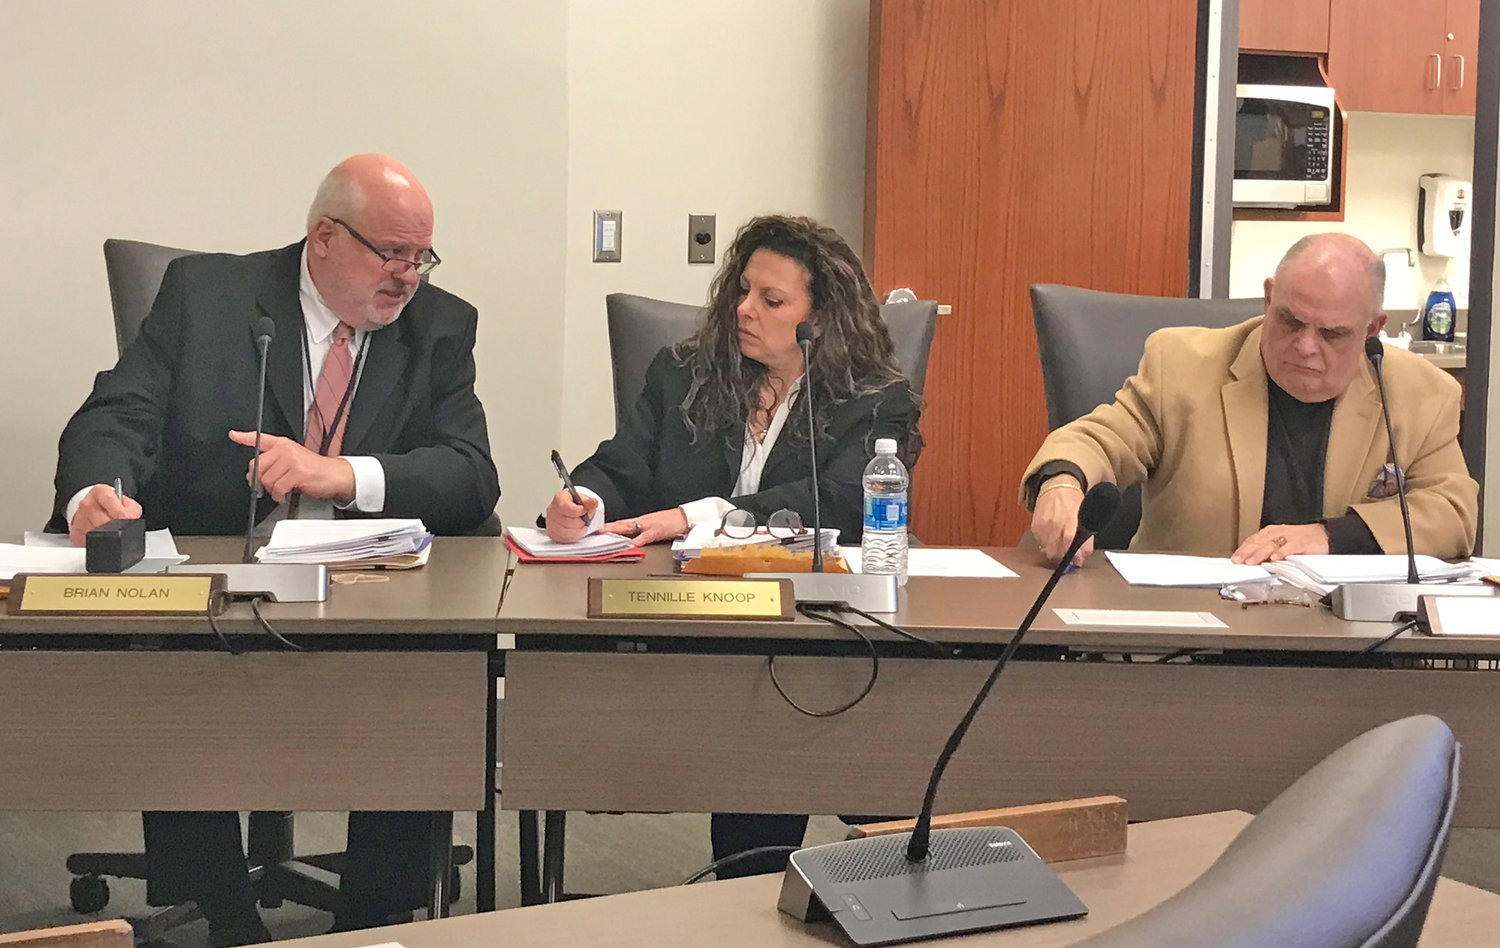 Utica City School District Acting Superintendent Brian Nolan, left, and Board of Education members Tennille Knoop, center, and Robert Cardillo listen to a report during the regular monthly board meeting Tuesday, Jan. 24 at the district's administration building in Utica.